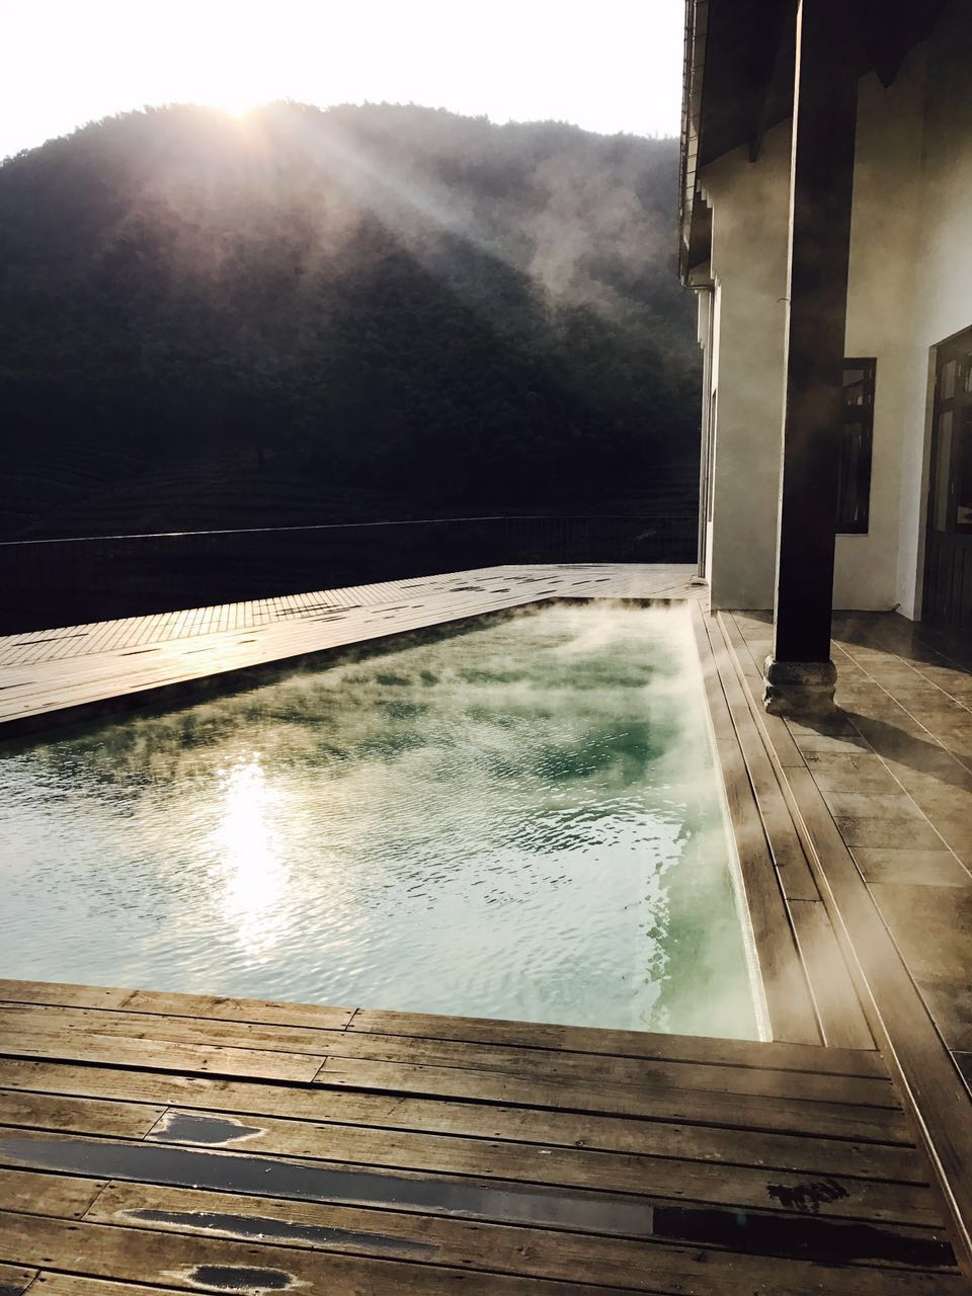 The swimming pool at La Residence. Photo: Handout